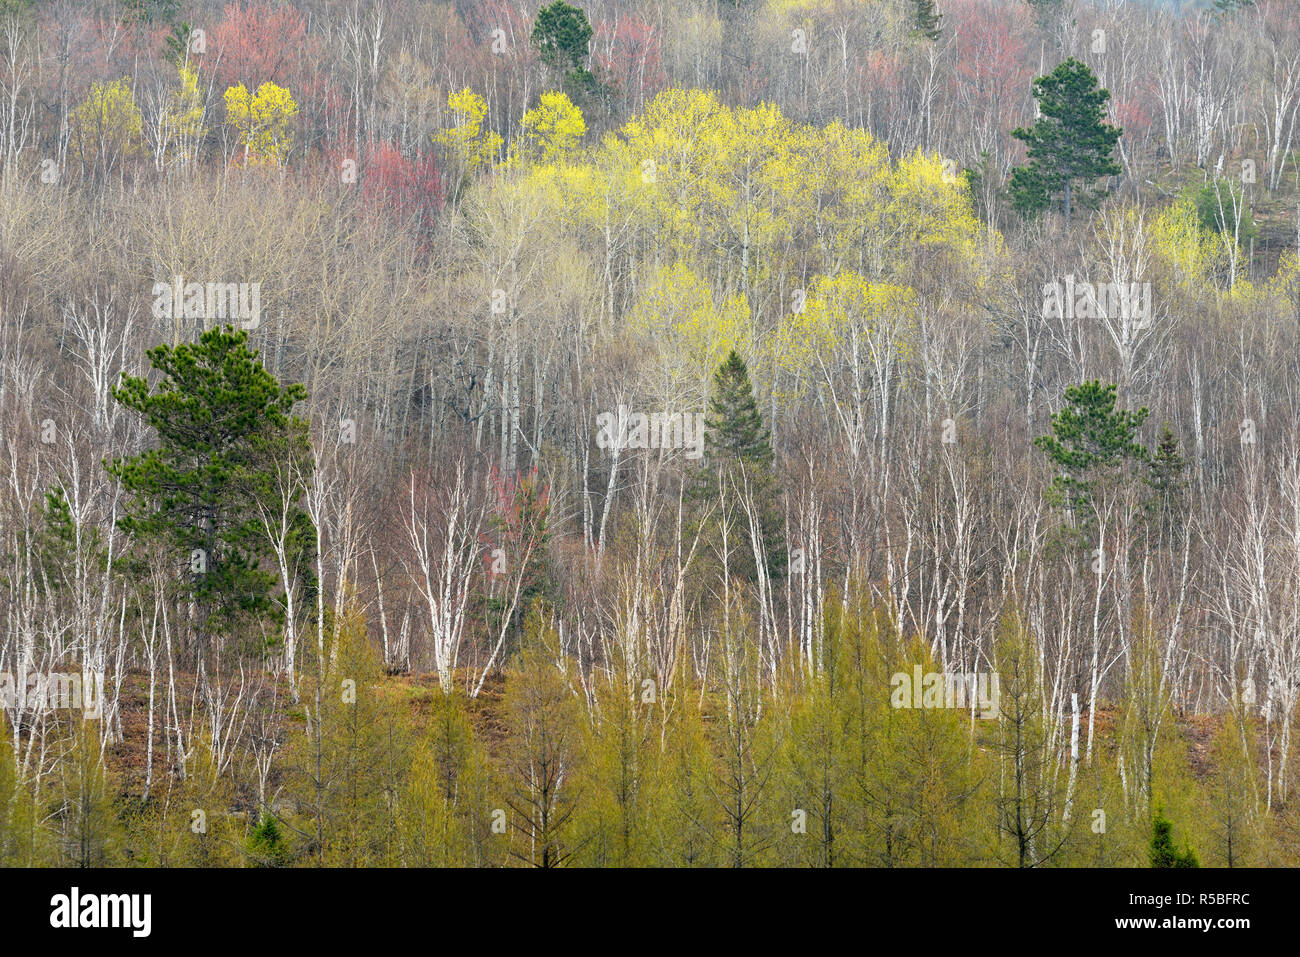 A hillside of birch and aspen with emerging spring foliage, Greater Sudbury, Ontario, Canada Stock Photo